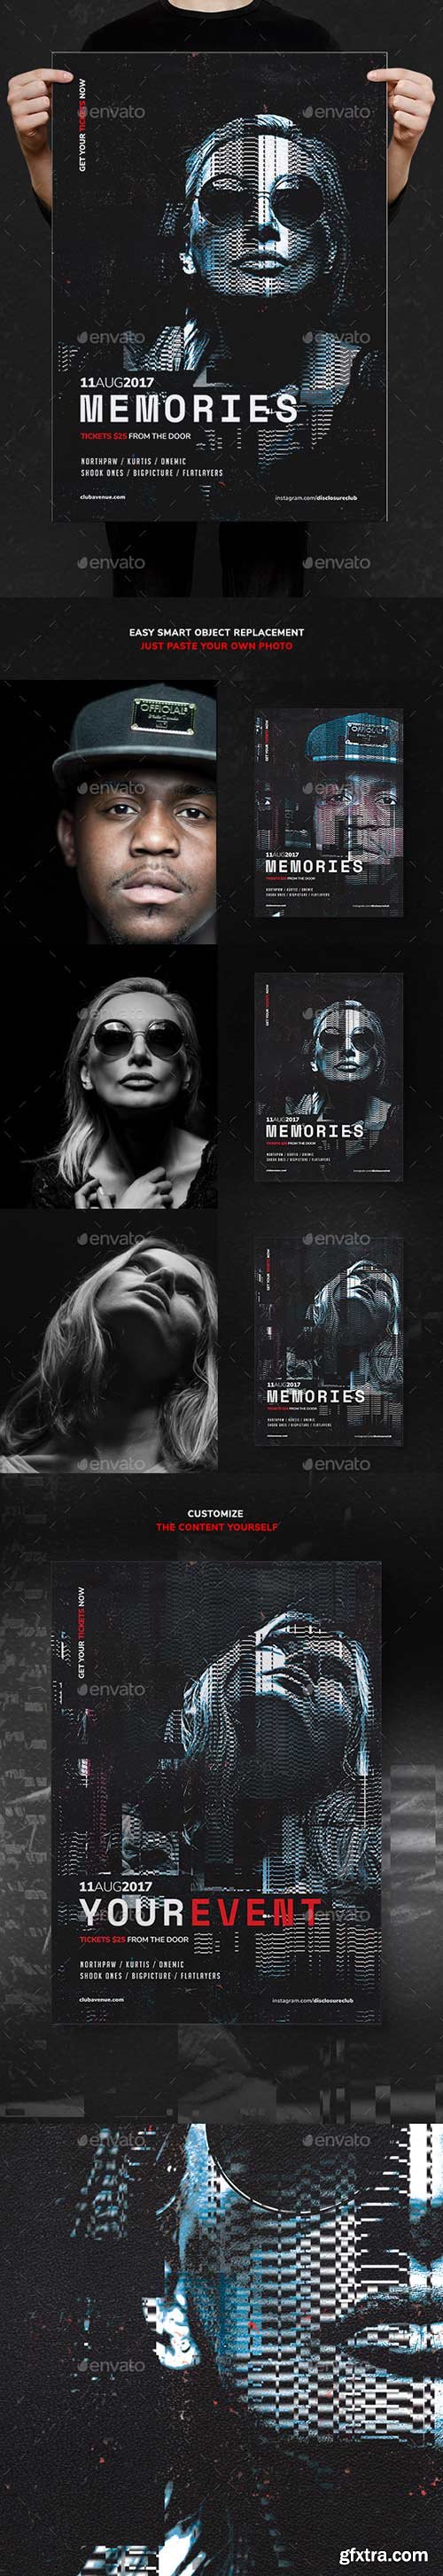 Graphicriver - Memories Flyer / Poster Template 20470346